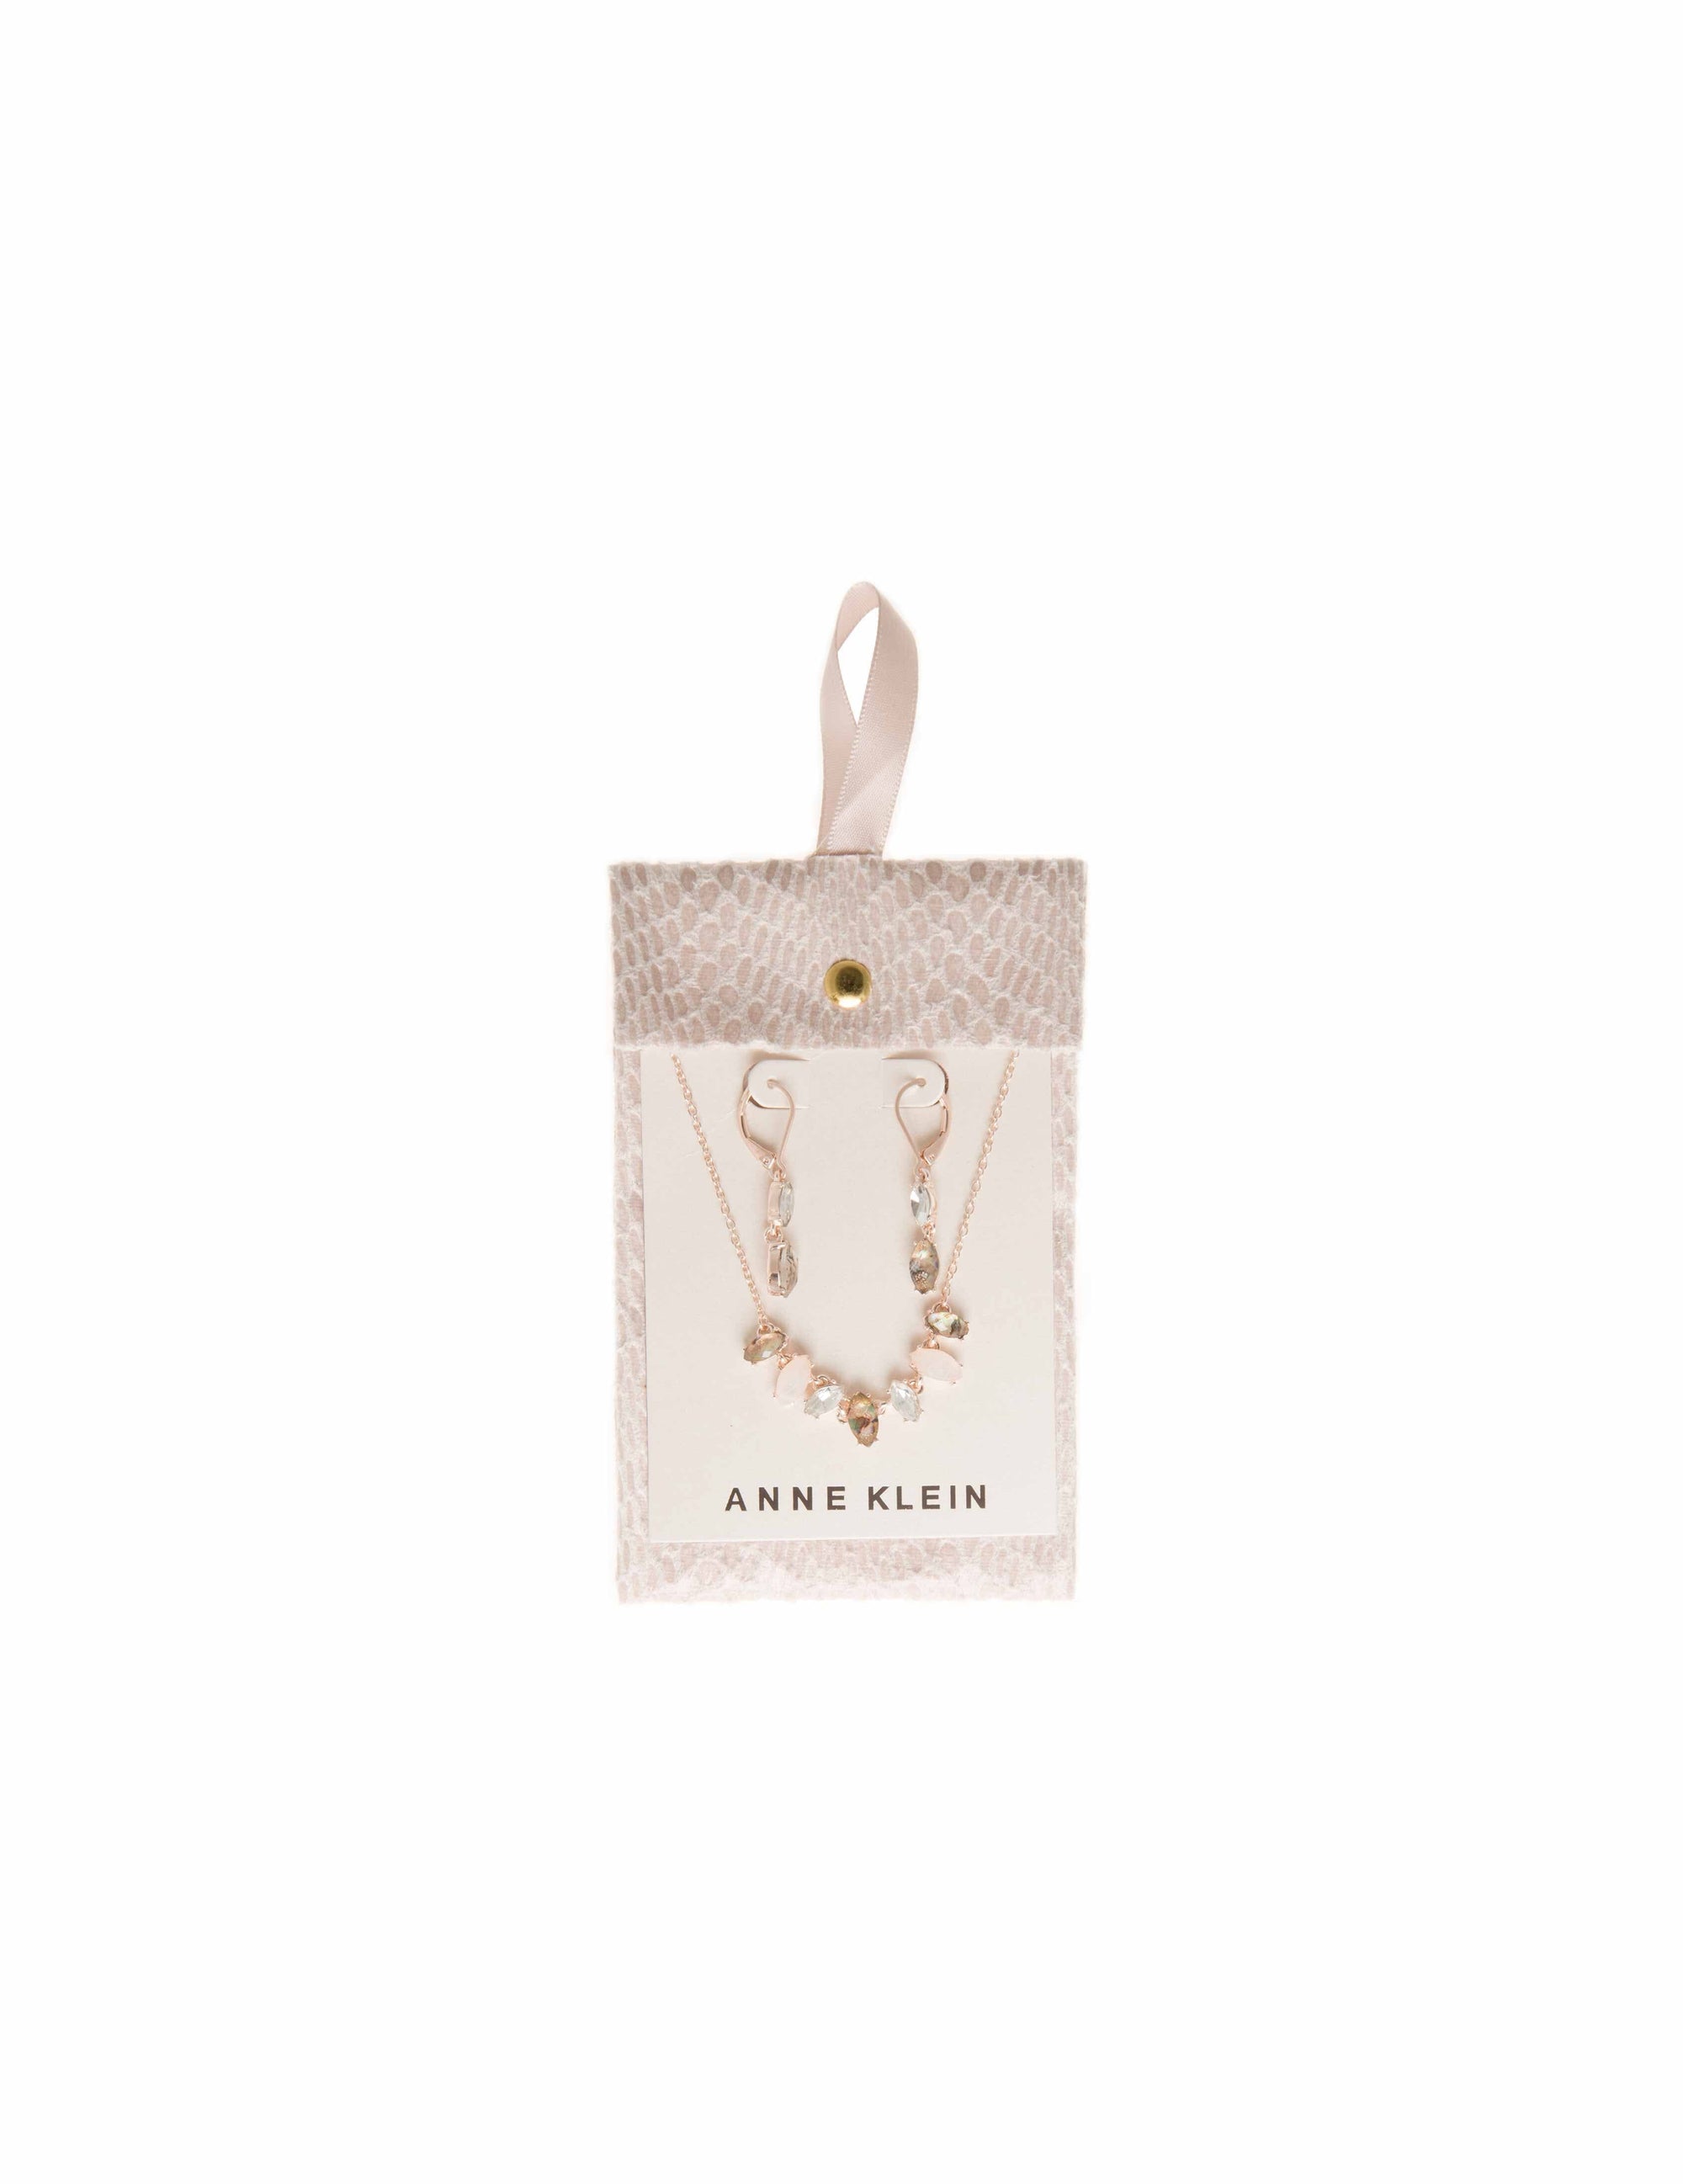 Anne Klein Pouch Navette Necklace & Earring Set Rose Gold/Blush